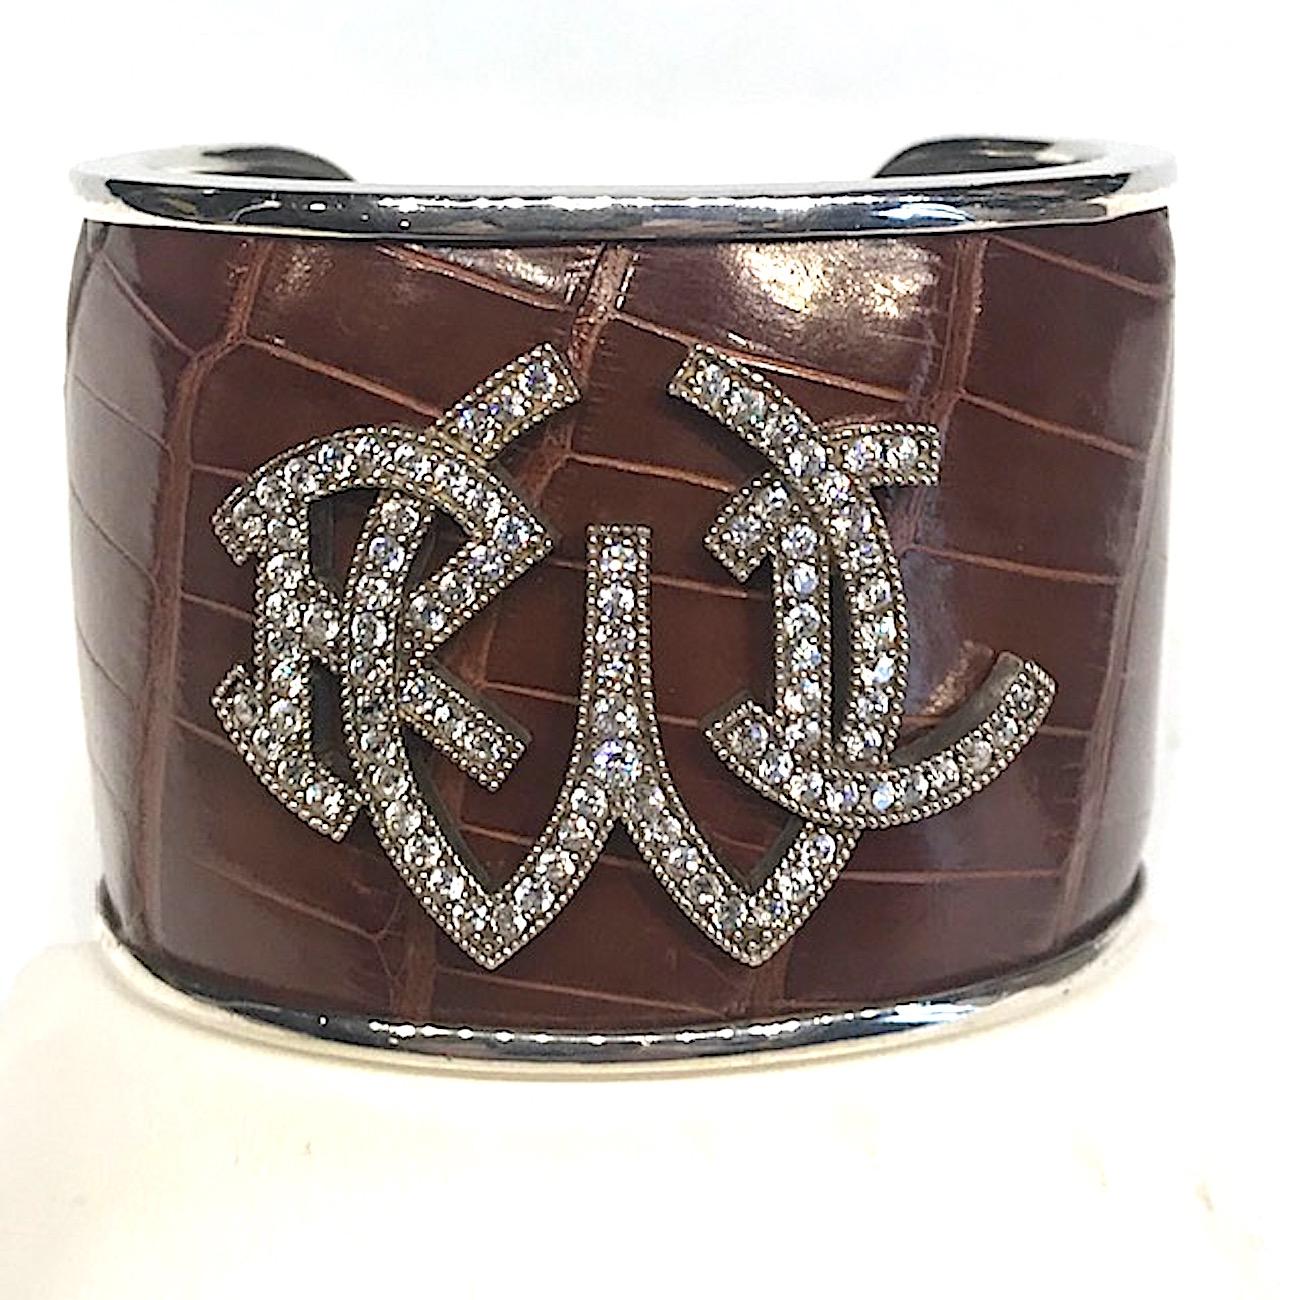 Heavy Ralph Lauren sterling silver cuff with stamped cognac color leather in an alligator pattern. The cuff is 2 inches wide and 7.25 long with 1.25 inch opening in the back. The front of the cuff is .25 of an inch thick and tapers to a little over